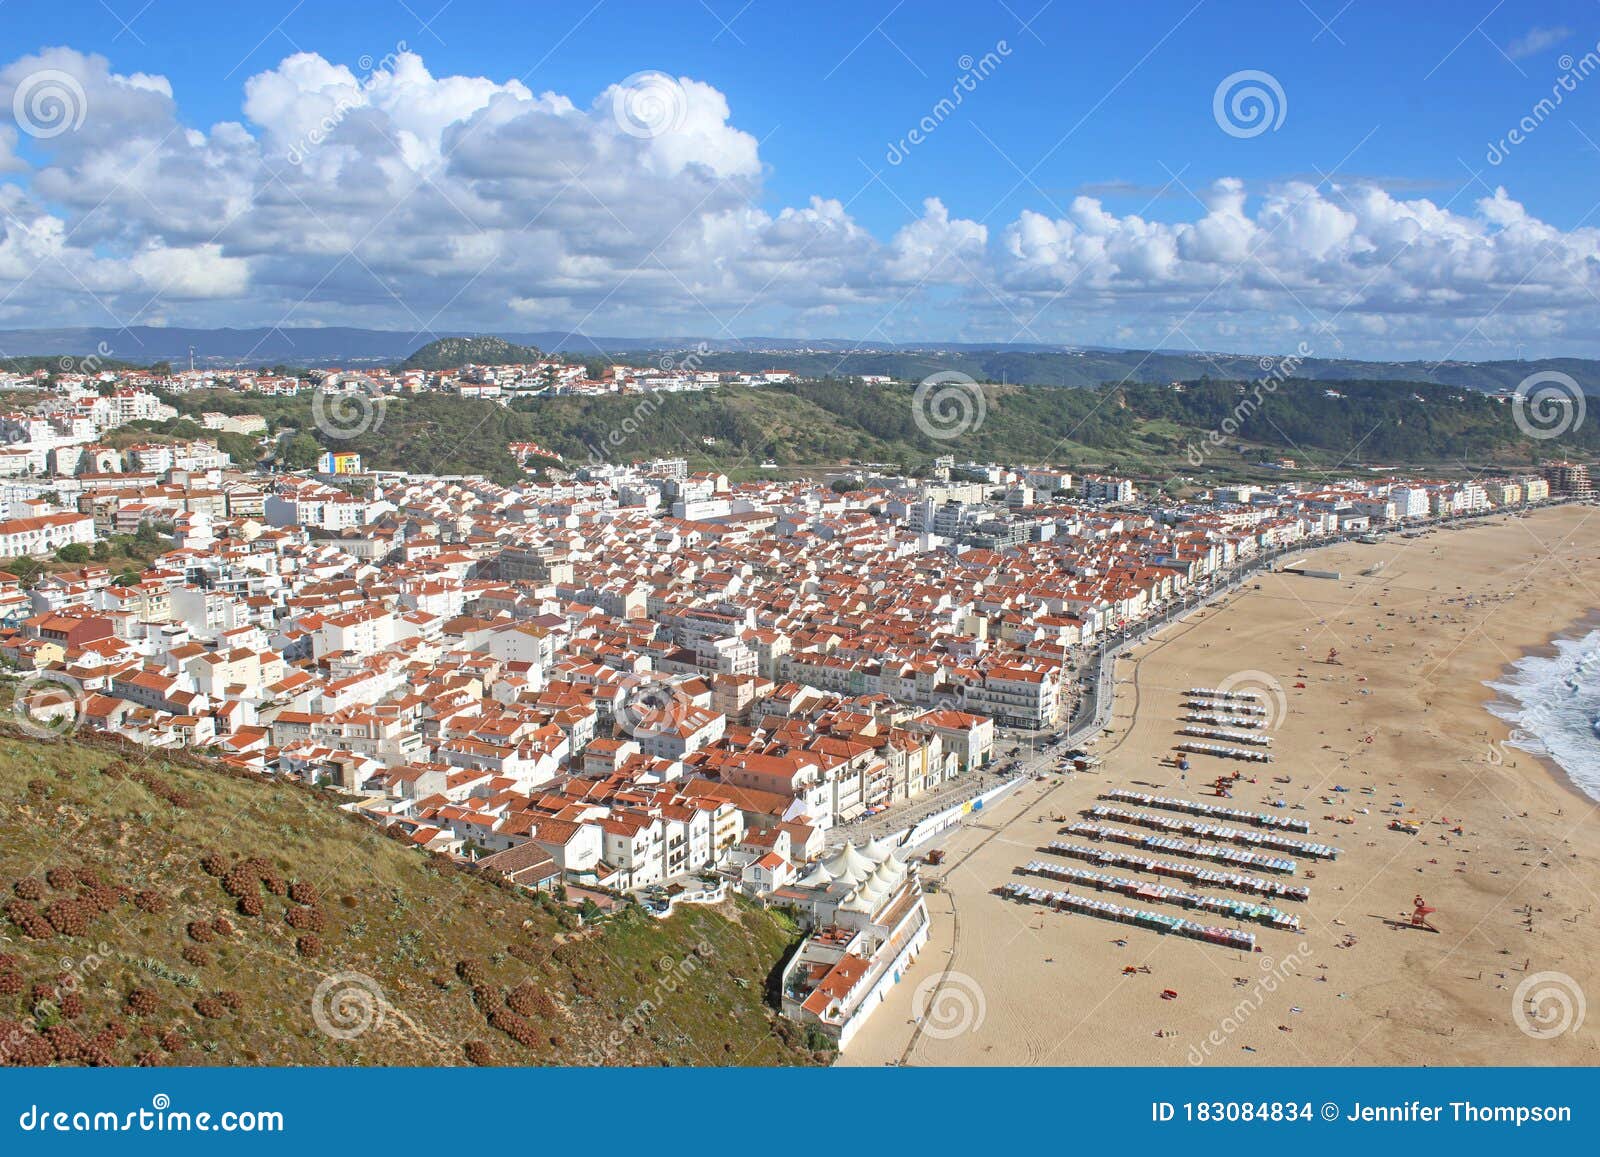 nazare town and beach from sitio, portugal